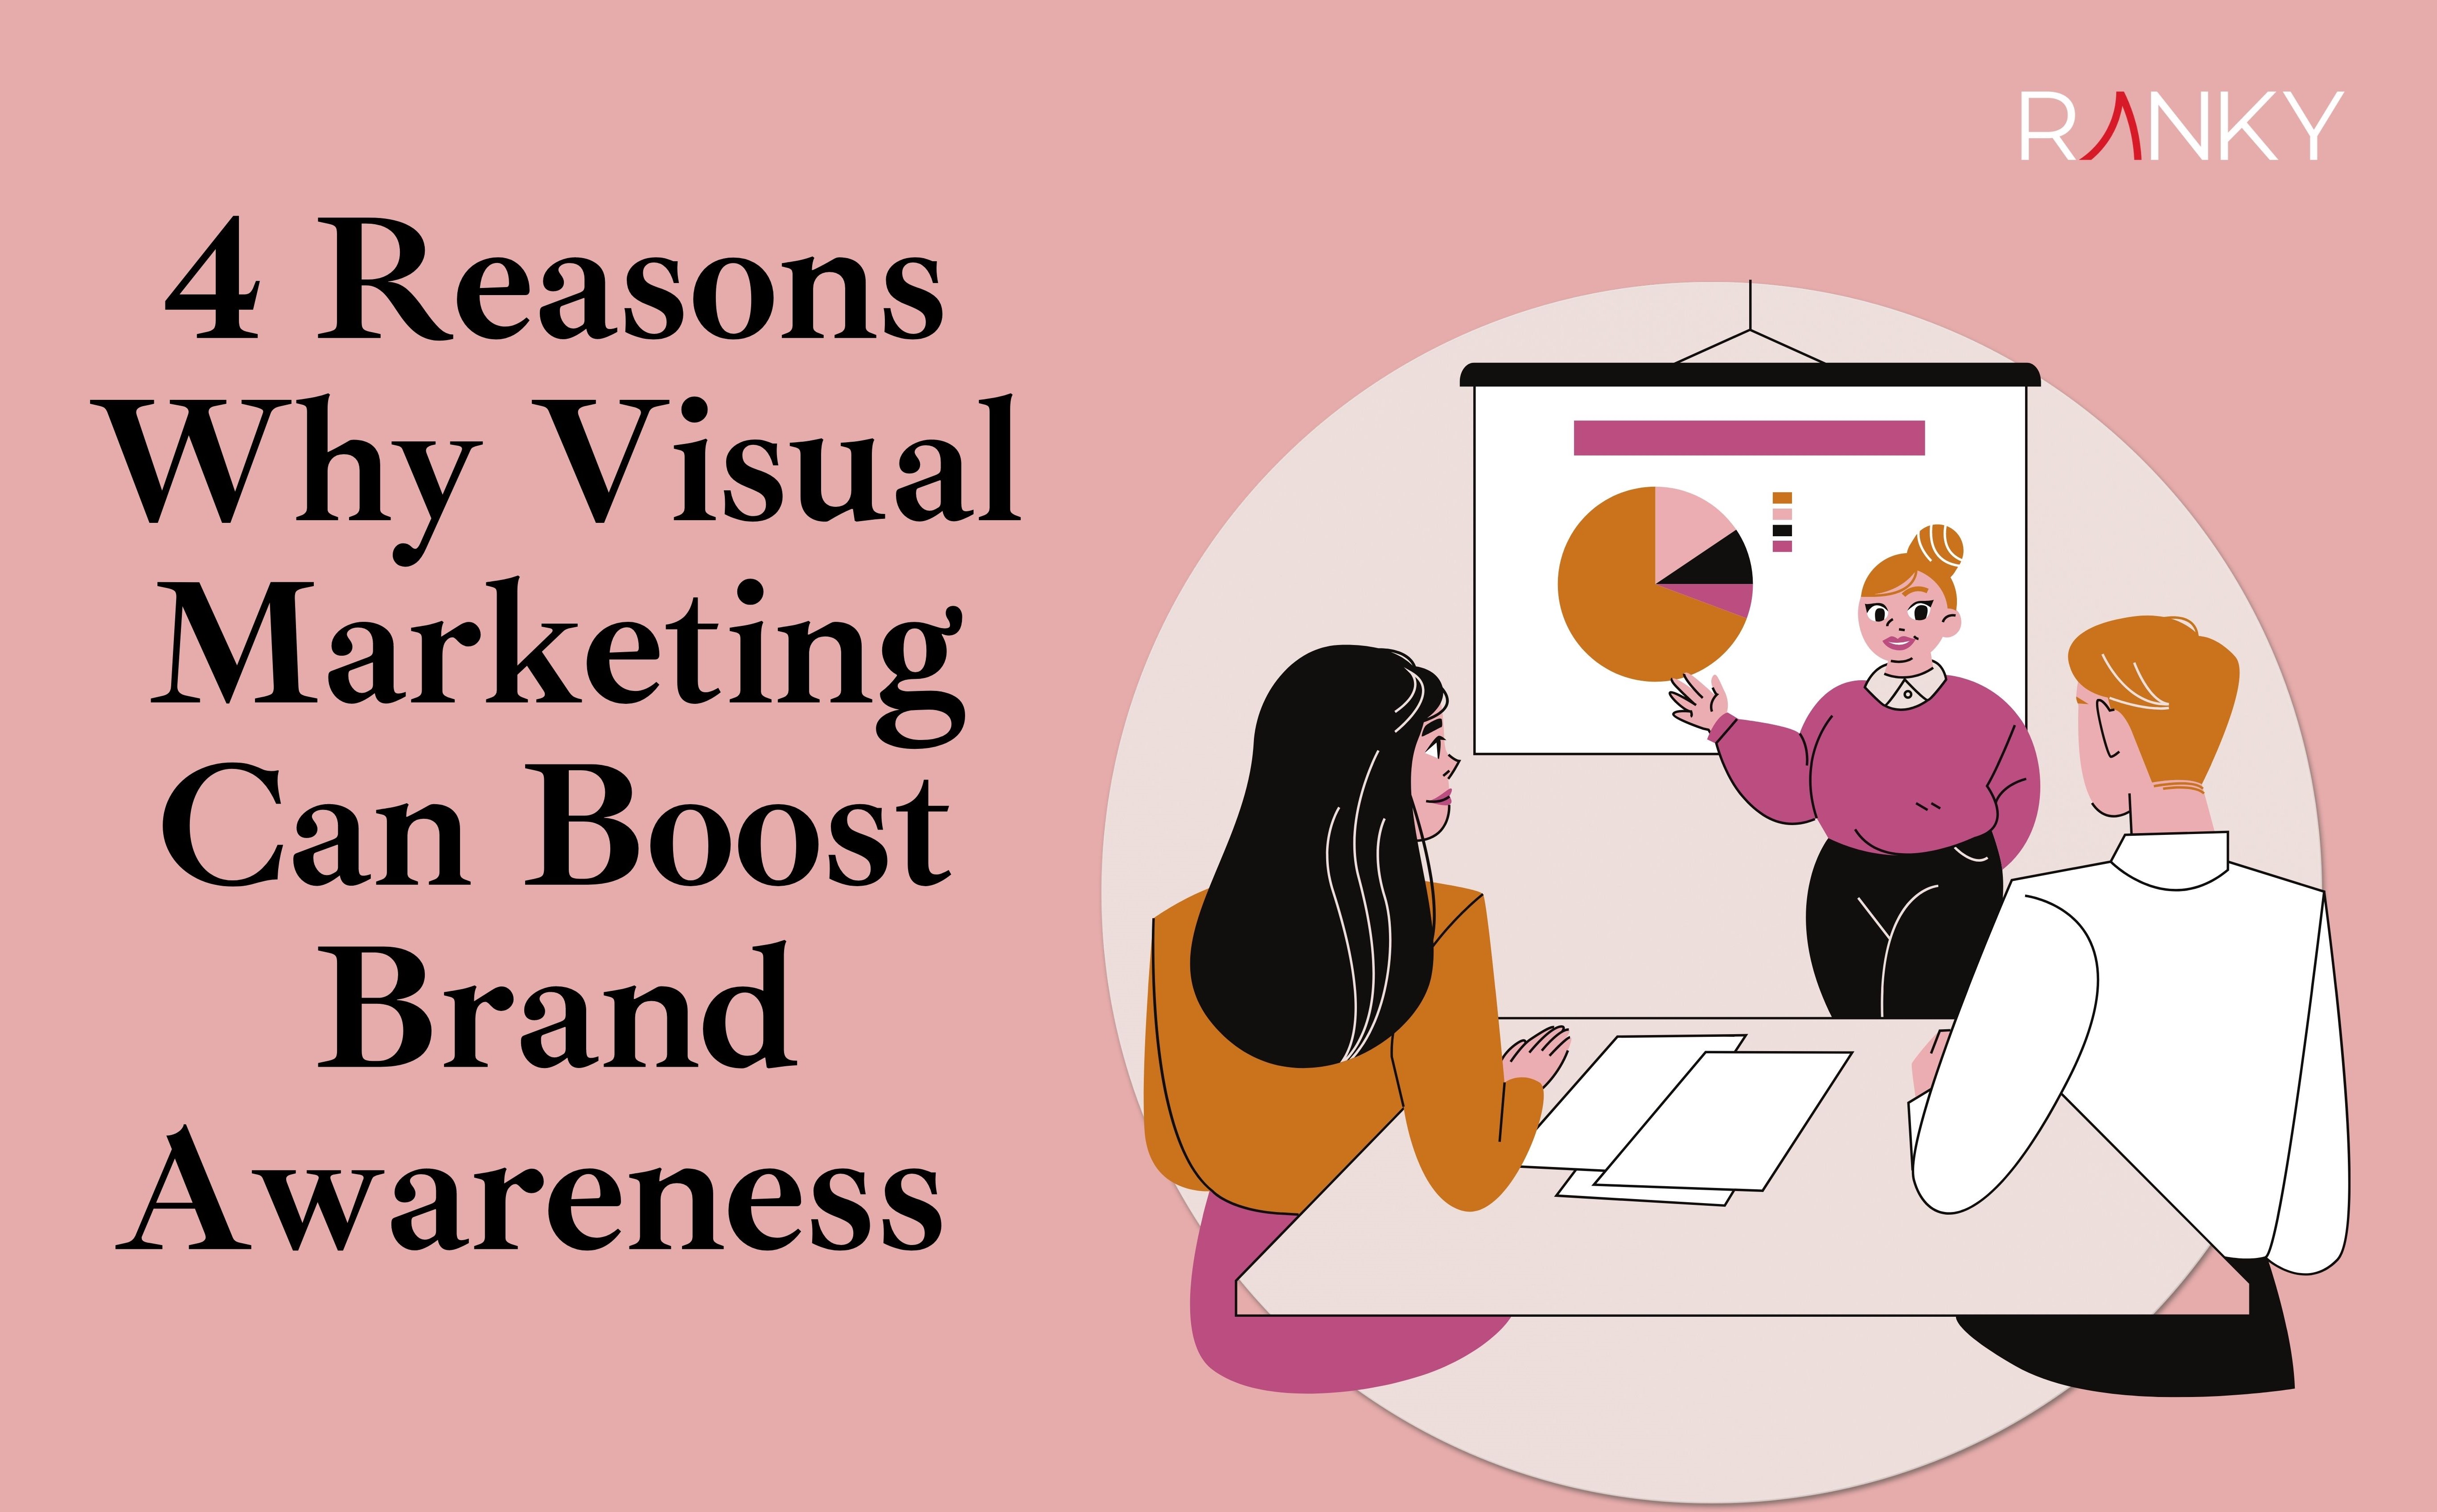 4 Reasons Why Visual Marketing Can Boost Brand Awareness